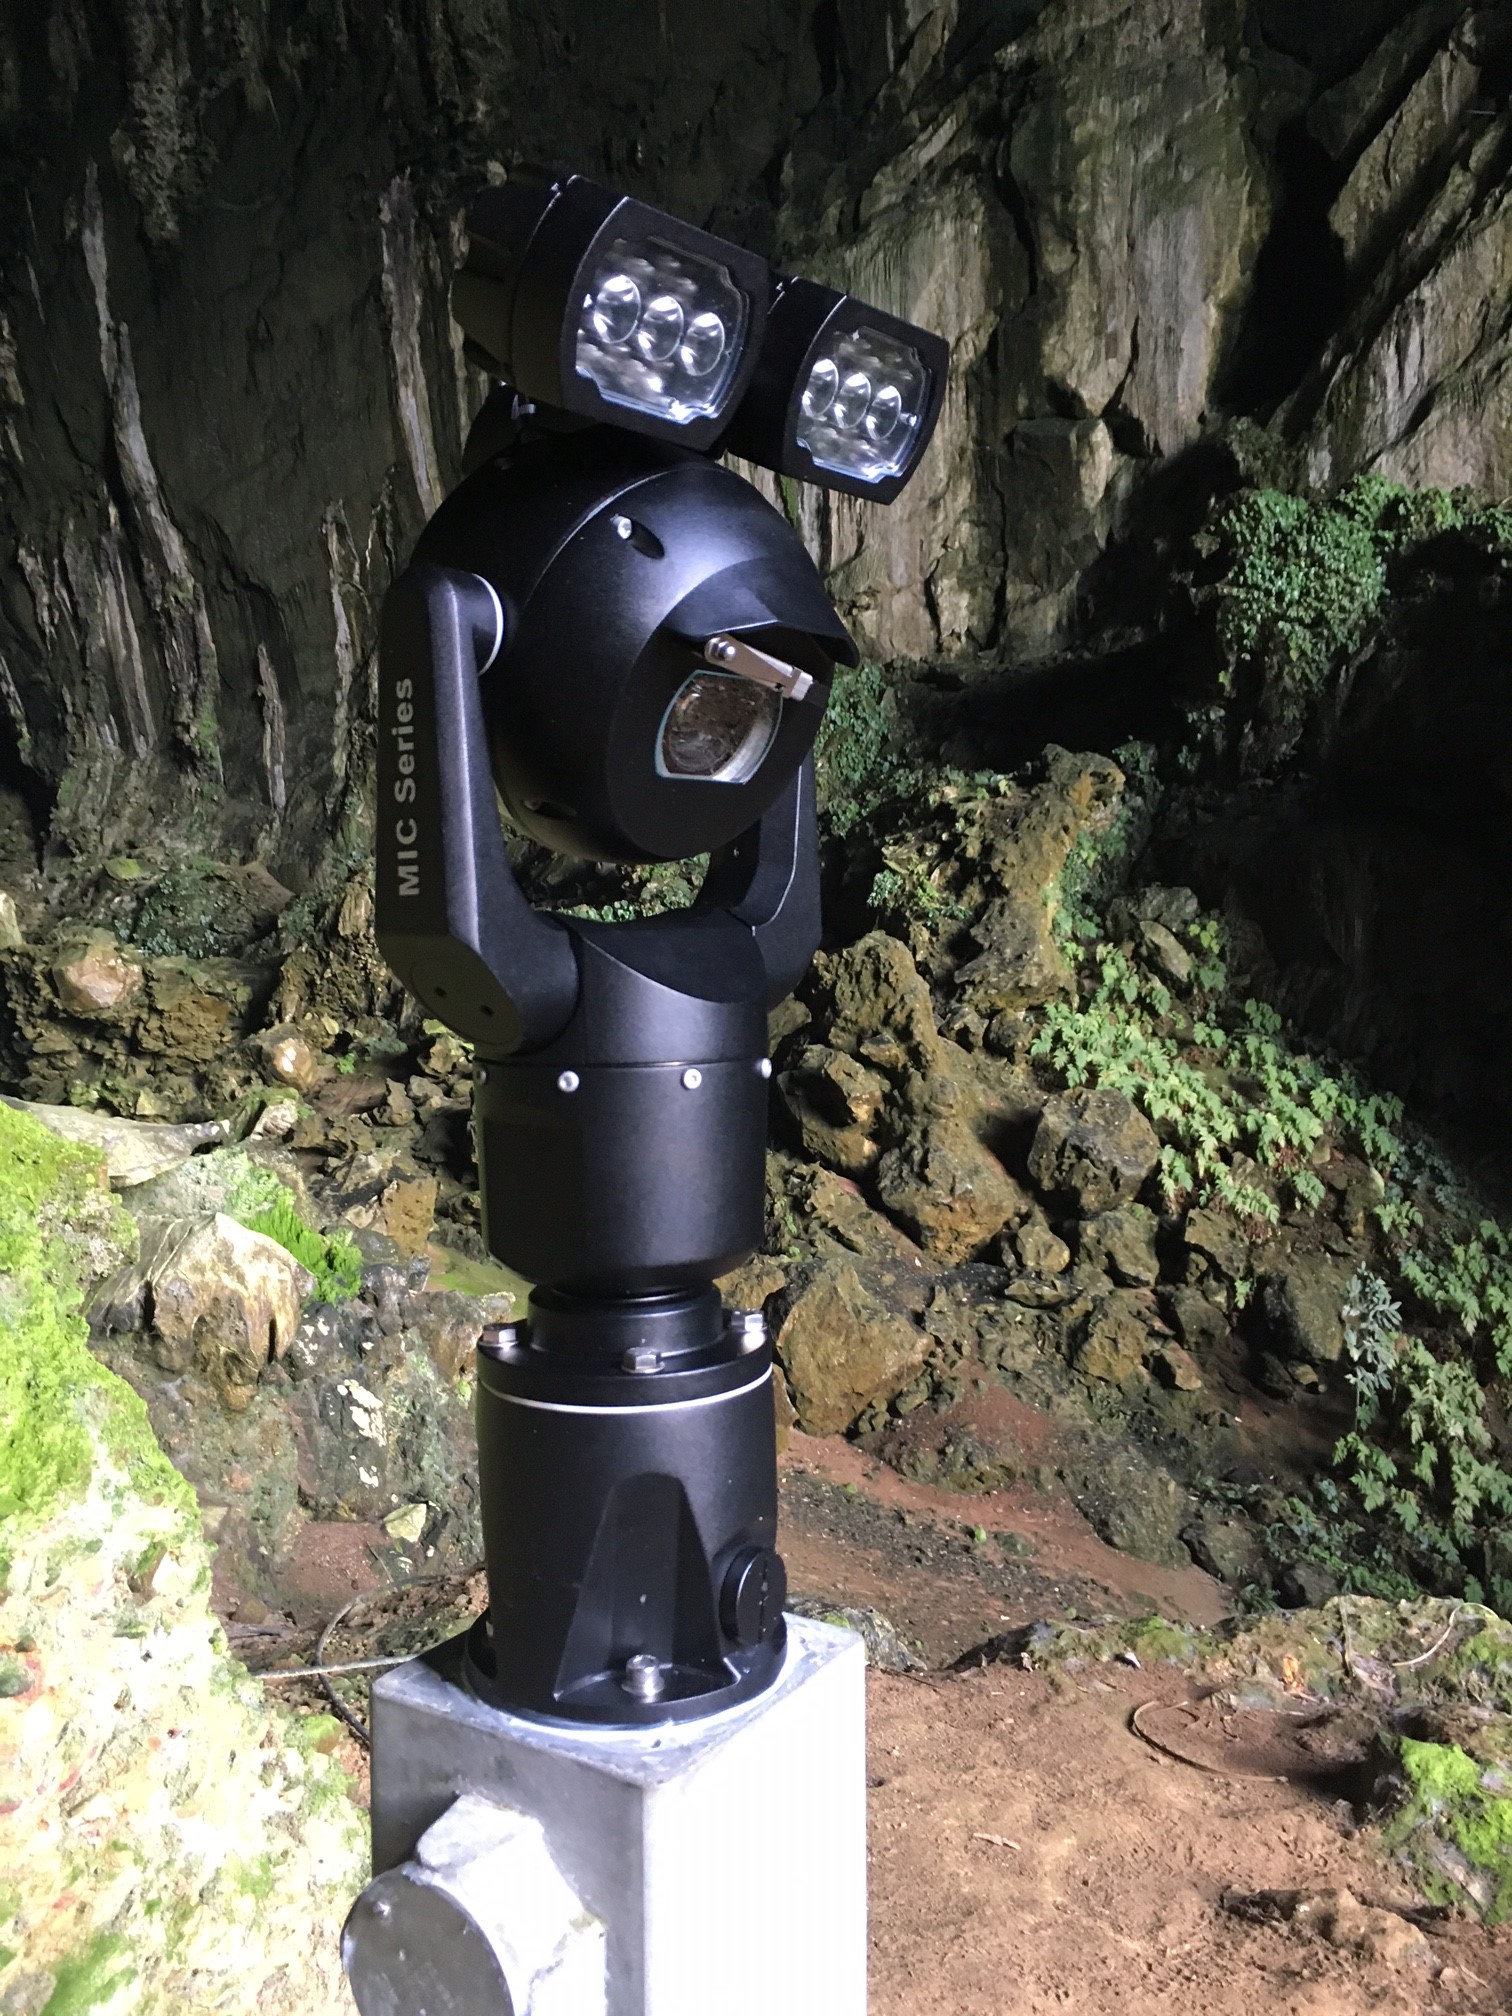 Bat watching in Borneo’s UNESCO World Heritage Mulu National Park with MIC Cameras from Bosch